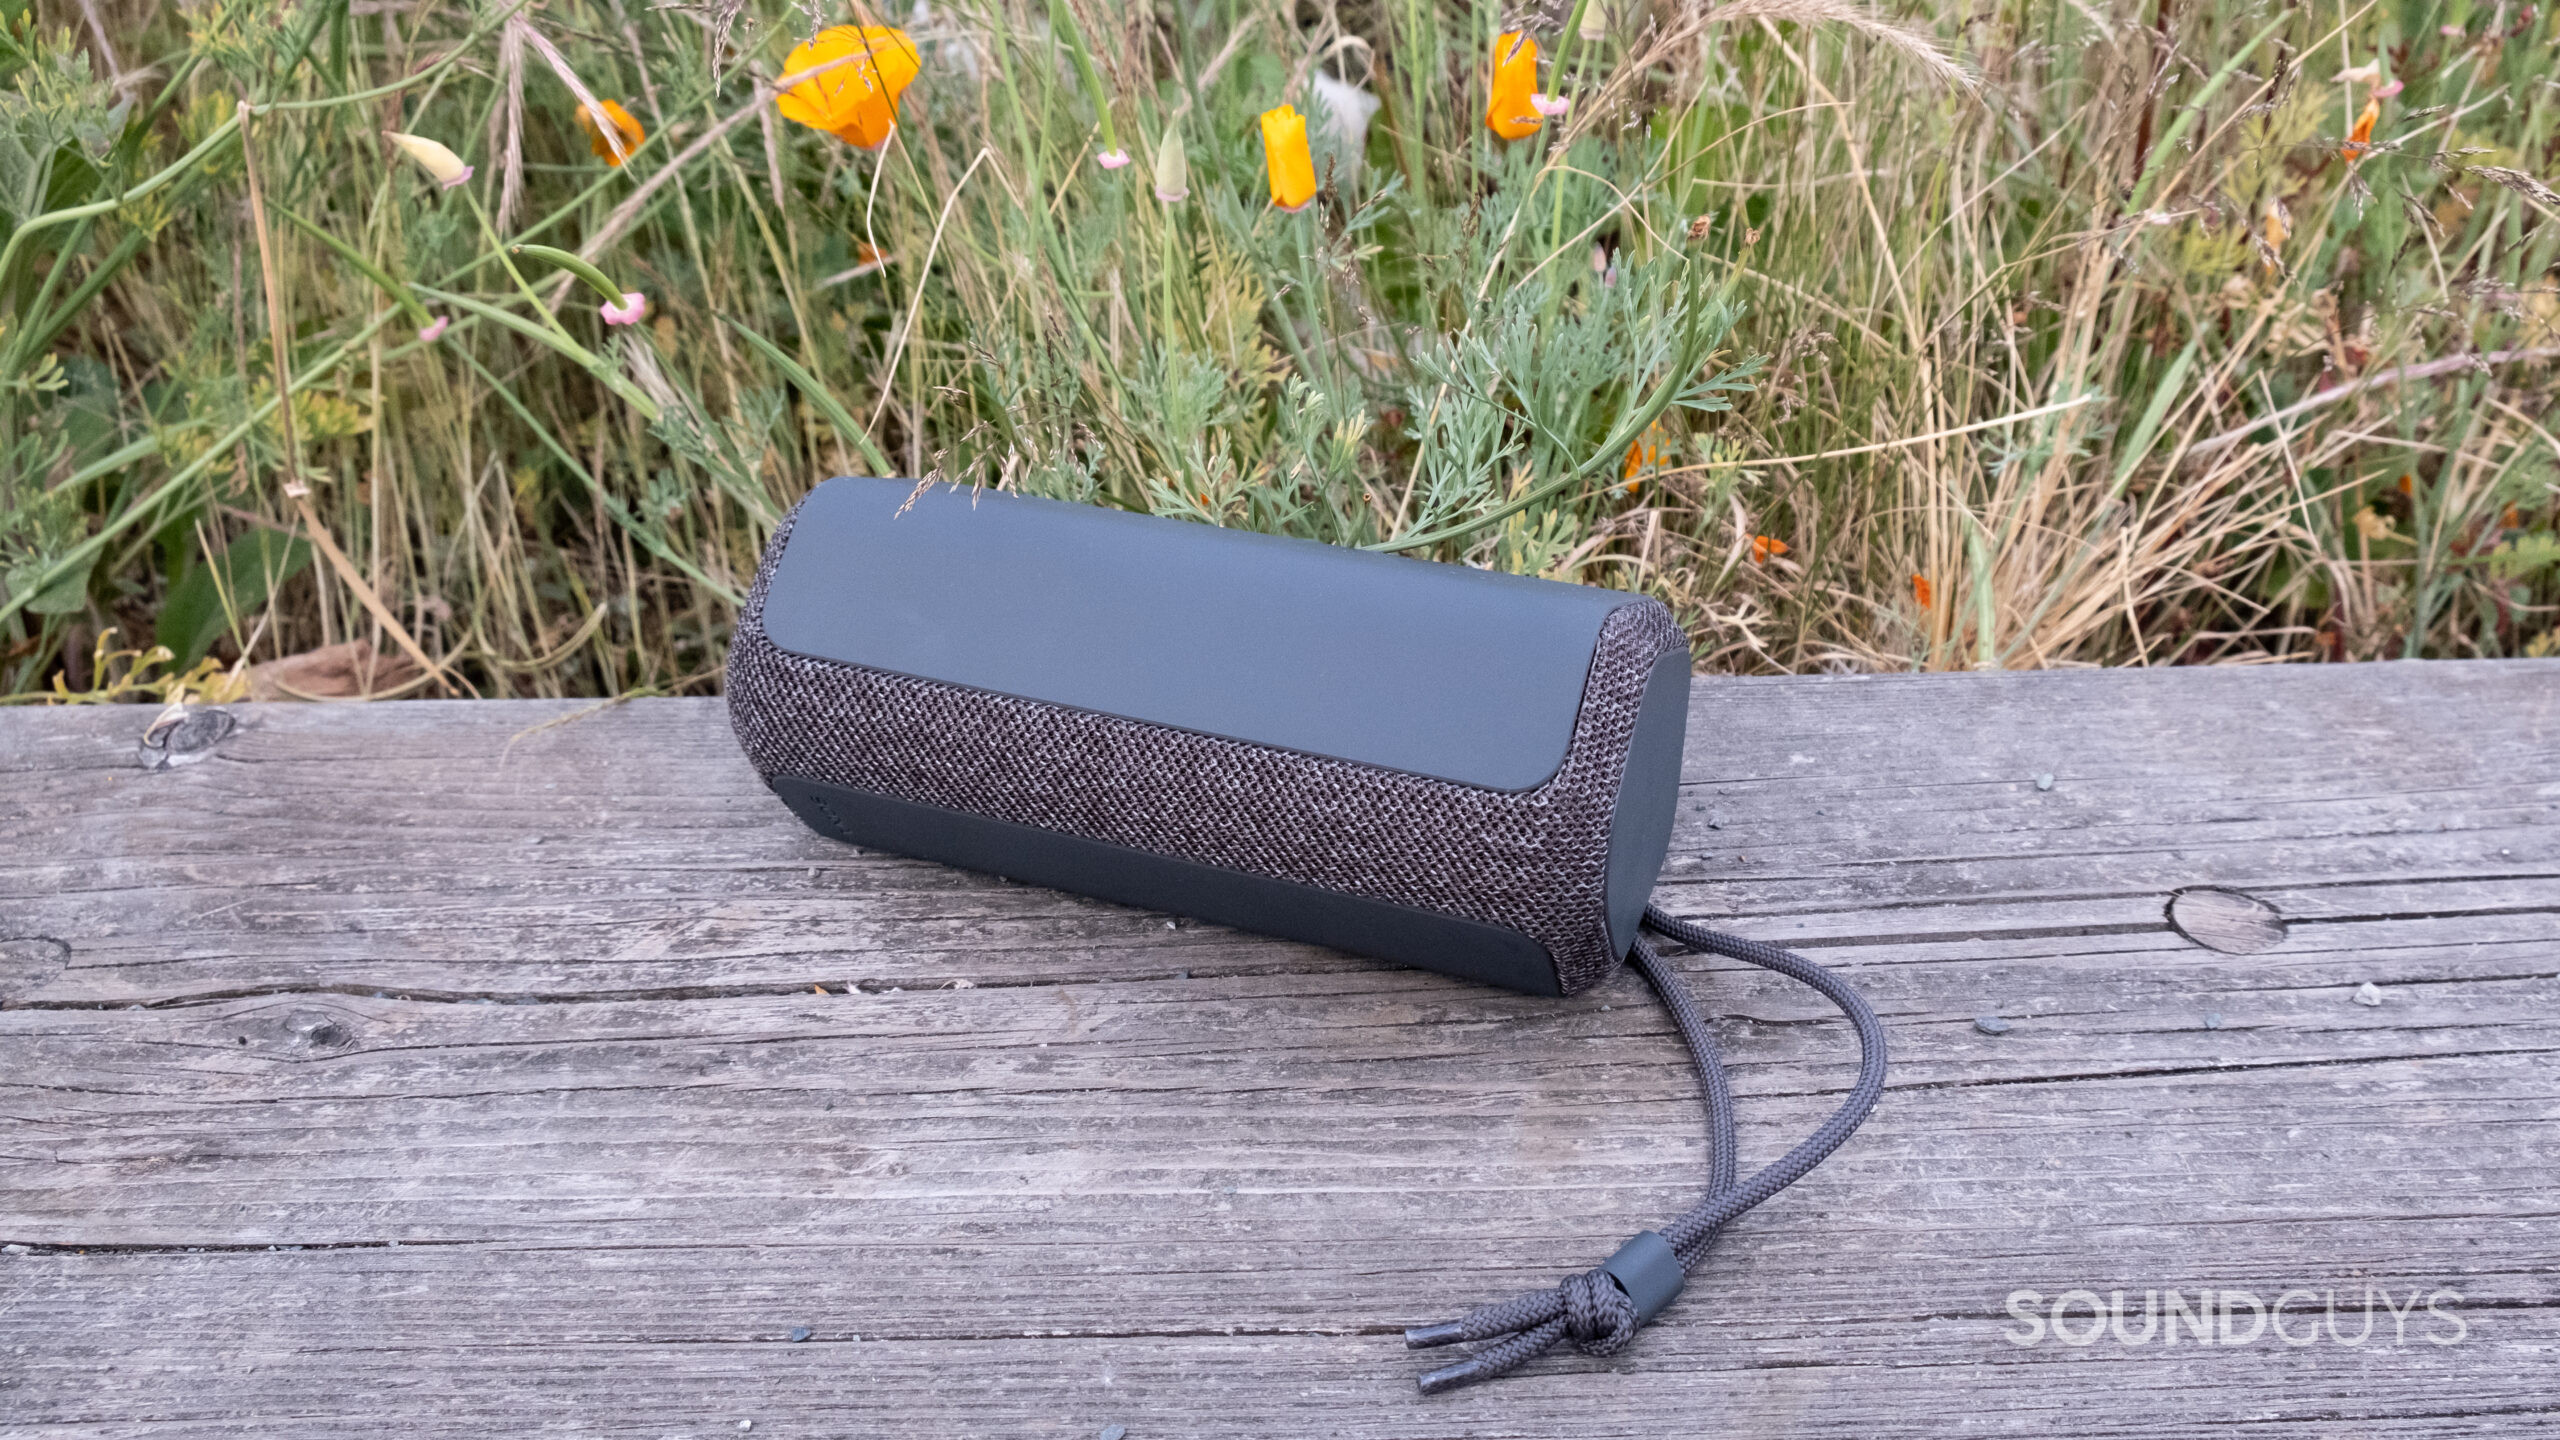 The Sony SRS-XE200 rests on its side on a wood surface with plants in the background.